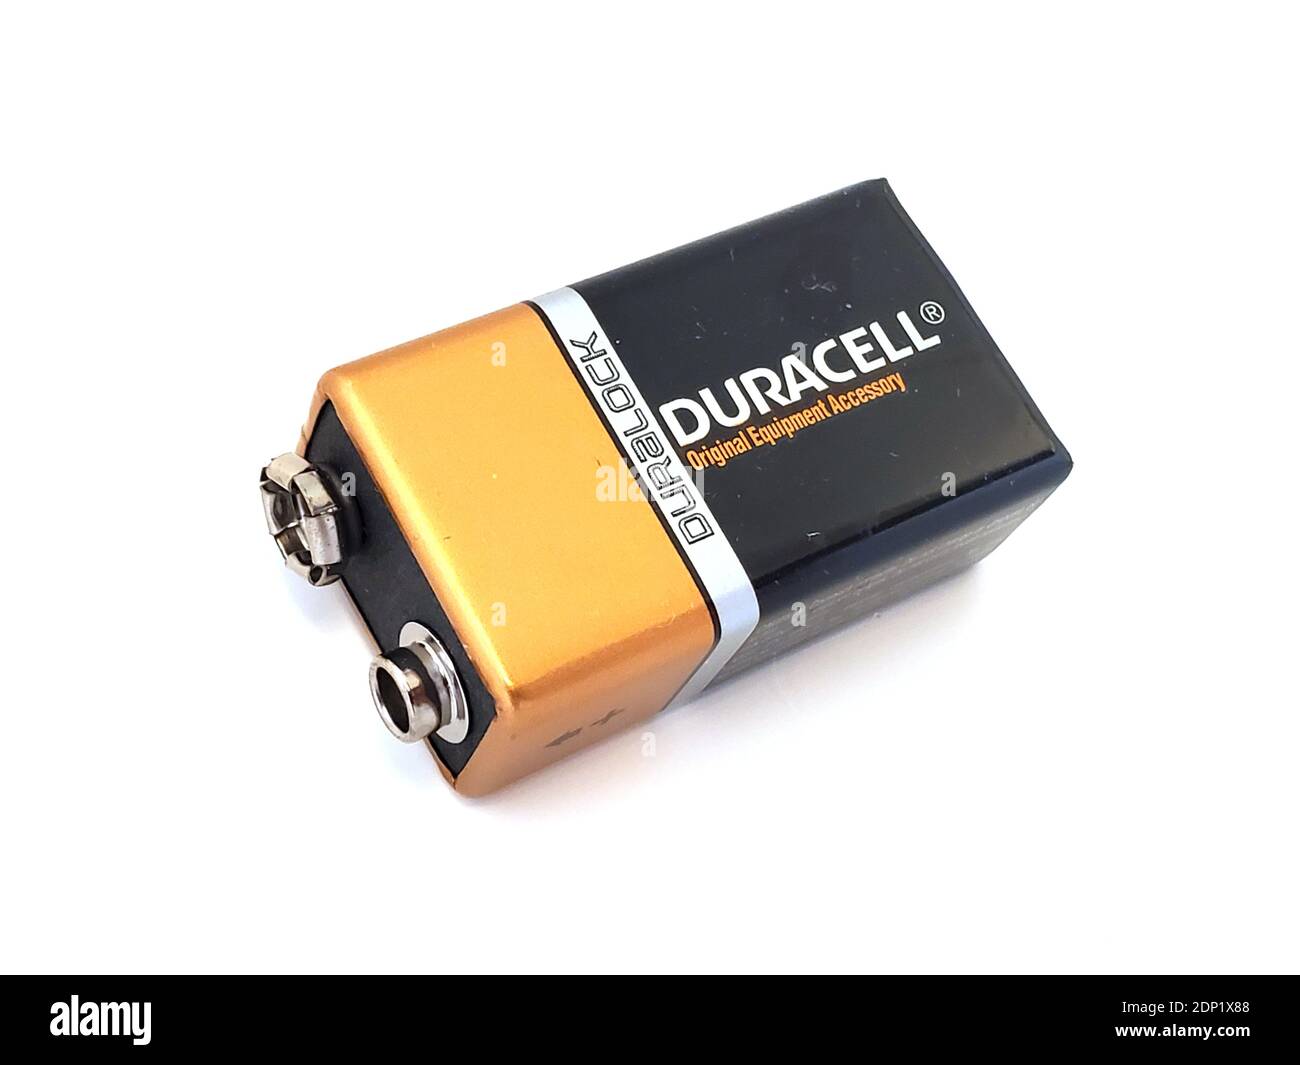 Close-up of Duracell brand 9 volt battery isolated on white background, San  Ramon, California, November 6, 2020 Stock Photo - Alamy